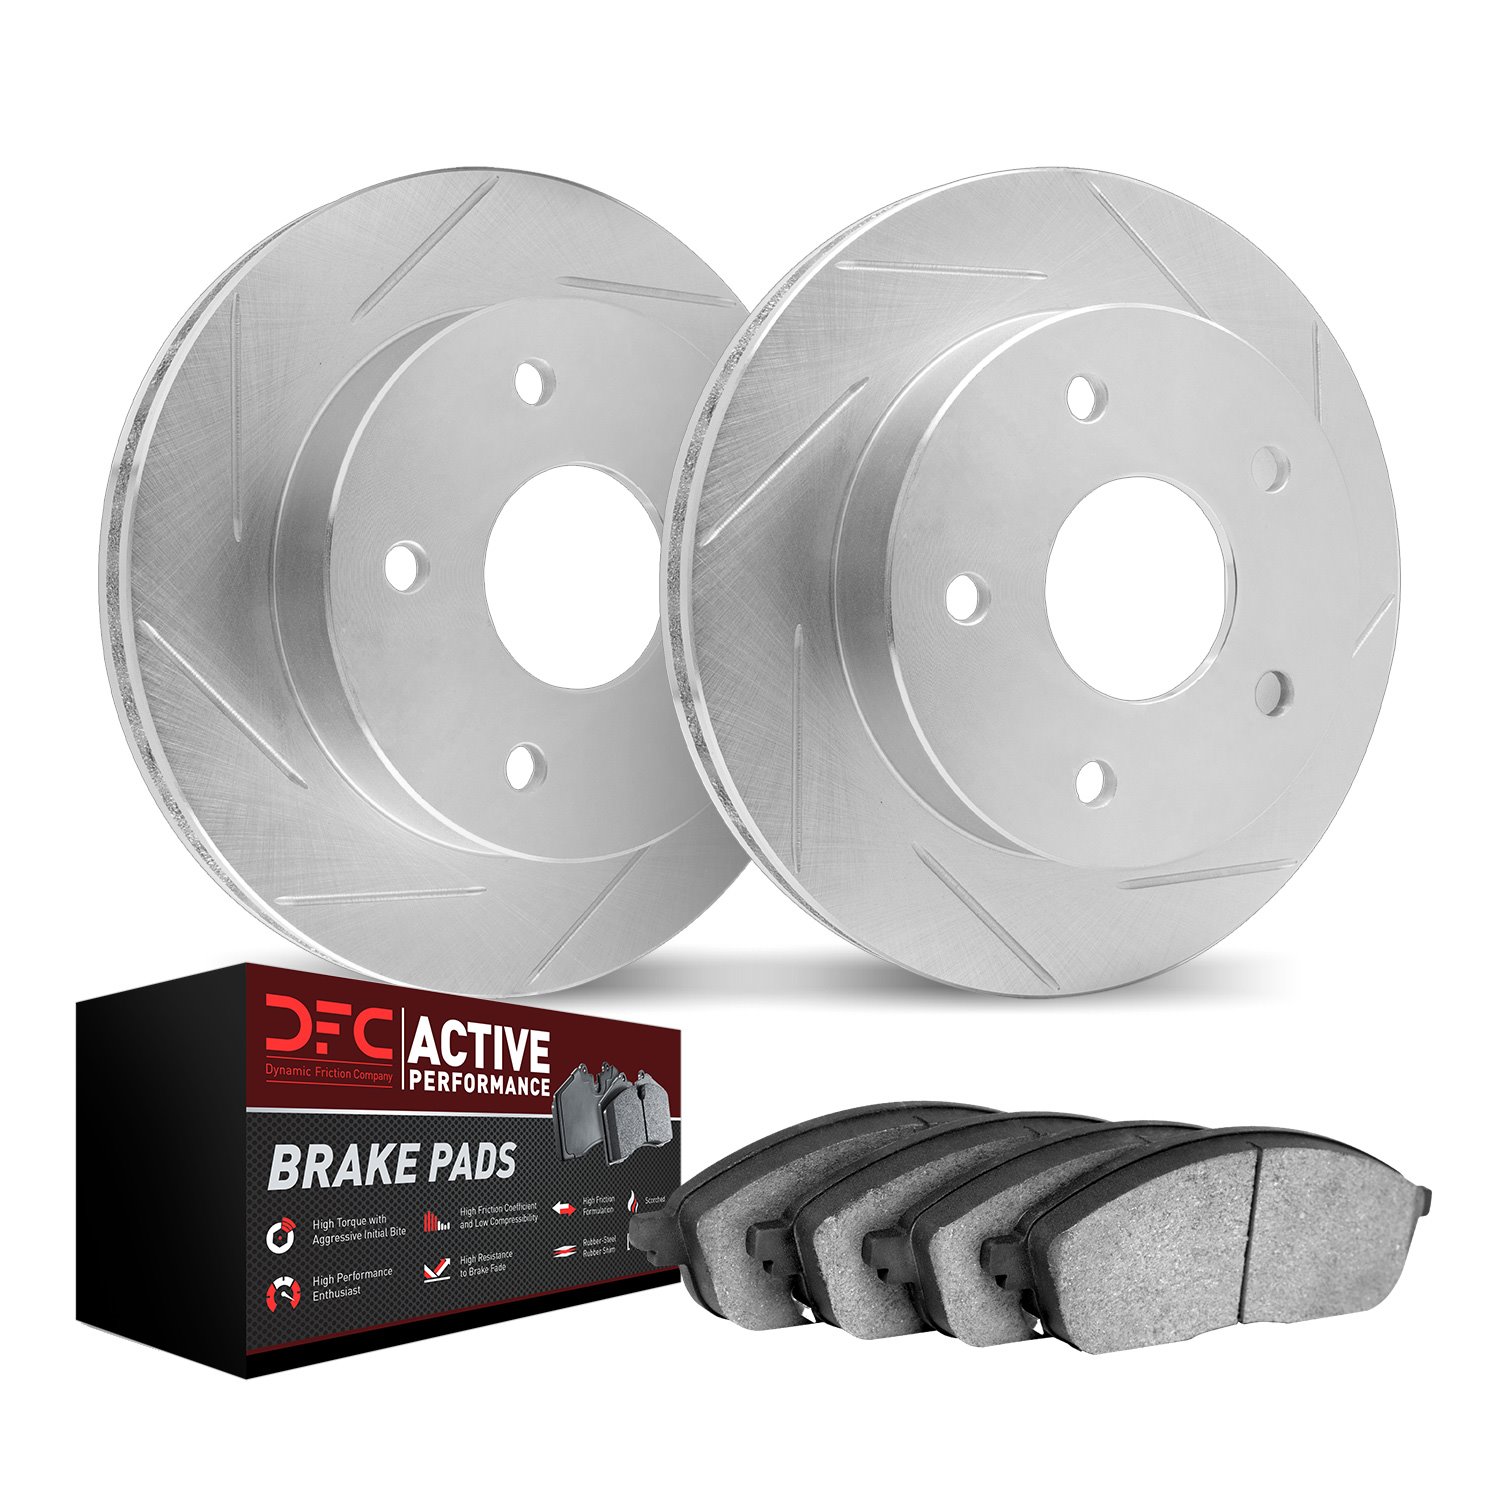 2702-42003 Geoperformance Slotted Brake Rotors with Active Performance Pads Kits, Fits Select Mopar, Position: Rear